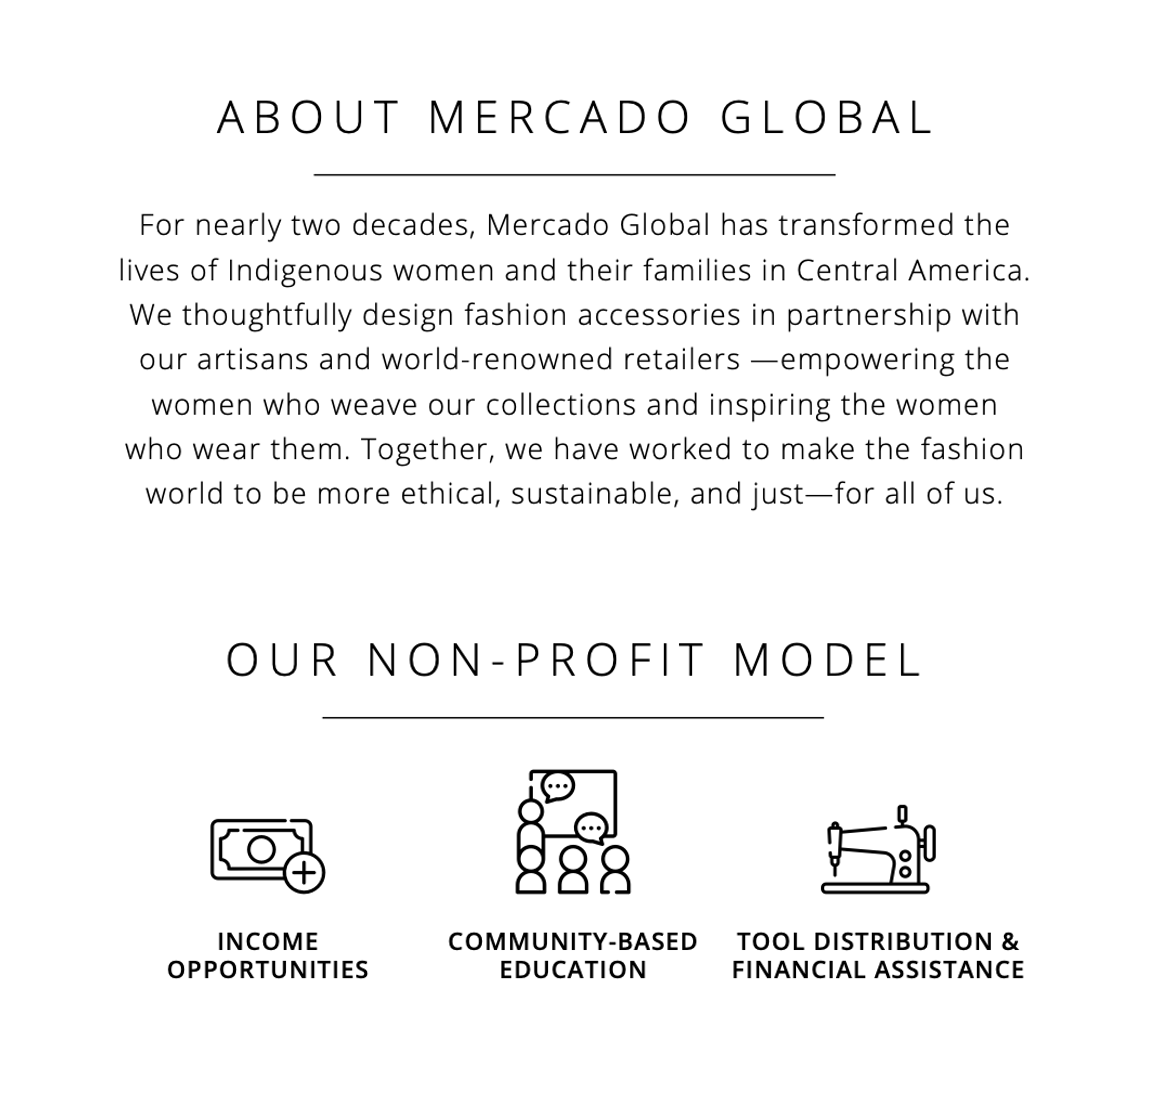 Graphic that says: About Mercado Global: For nearly two decades, Mercado Global has transformed the lives of Indigenous women and their families in Central America. We thoughtfully design fashion accessories in partnership with our artisans and world-renowned retailers—empowering the women who weave our collections and inspiring the women who wear them. Together, we have worked to make the fashion world to be more ethical, sustainable, and just—for all of us.